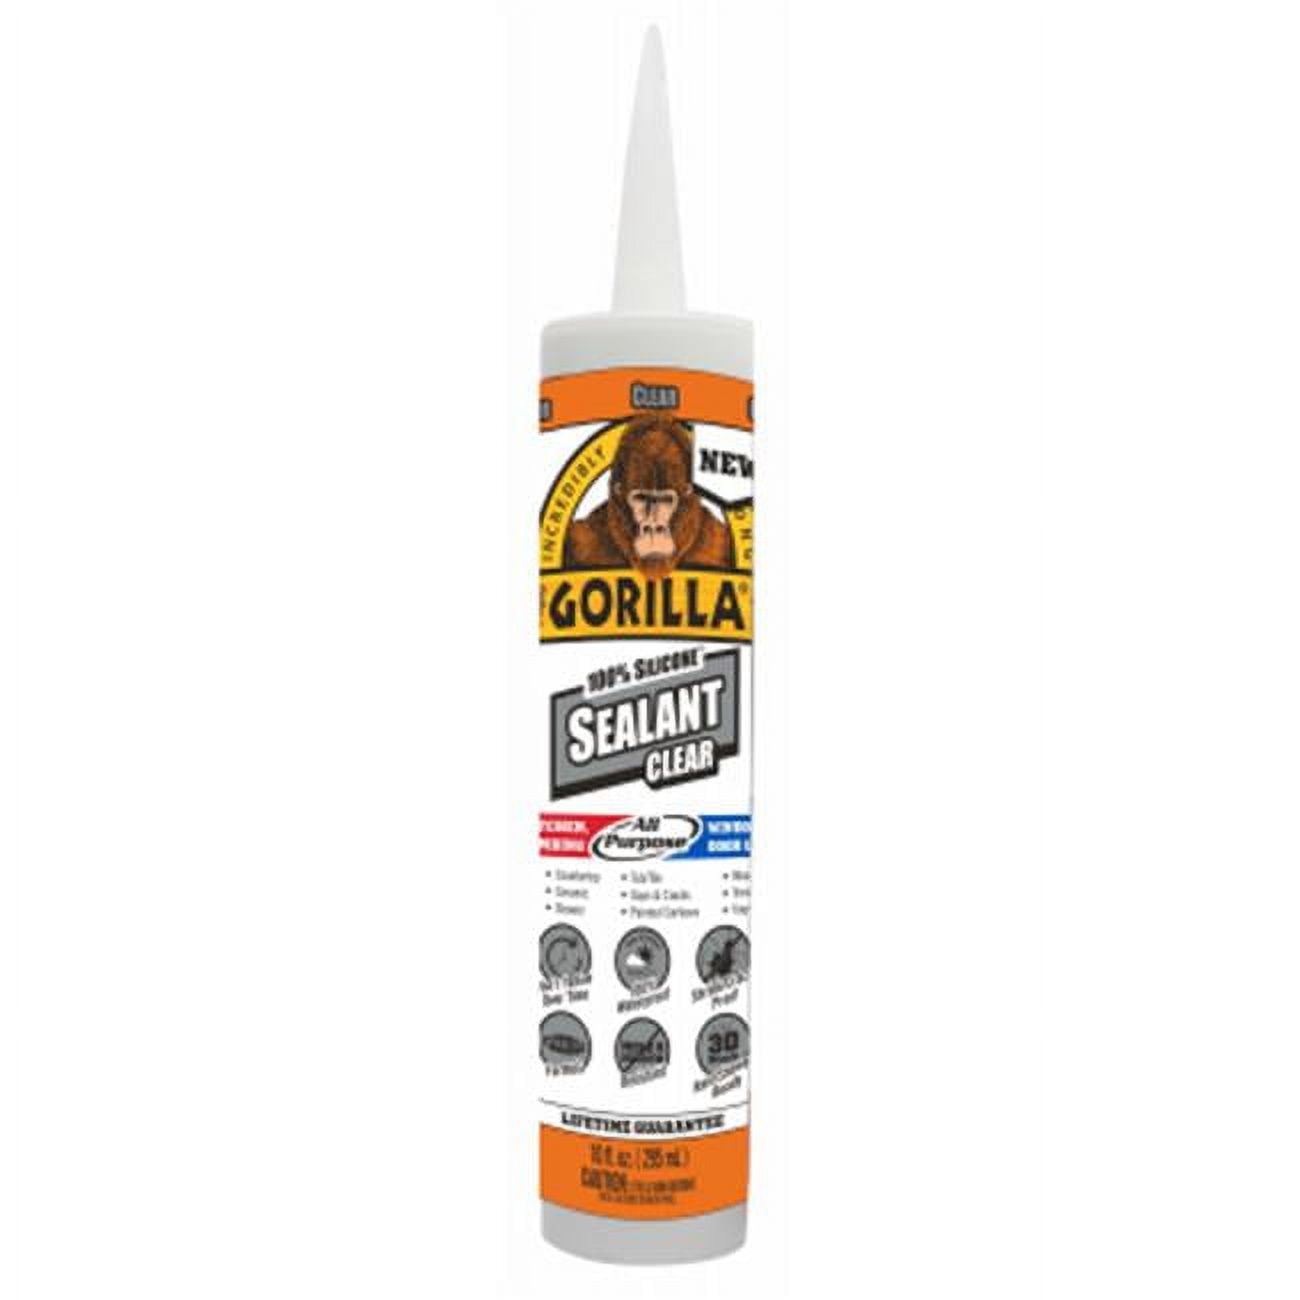 Gorilla Glue HD Contact Adhesive Spray 12.2oz Can Recommended